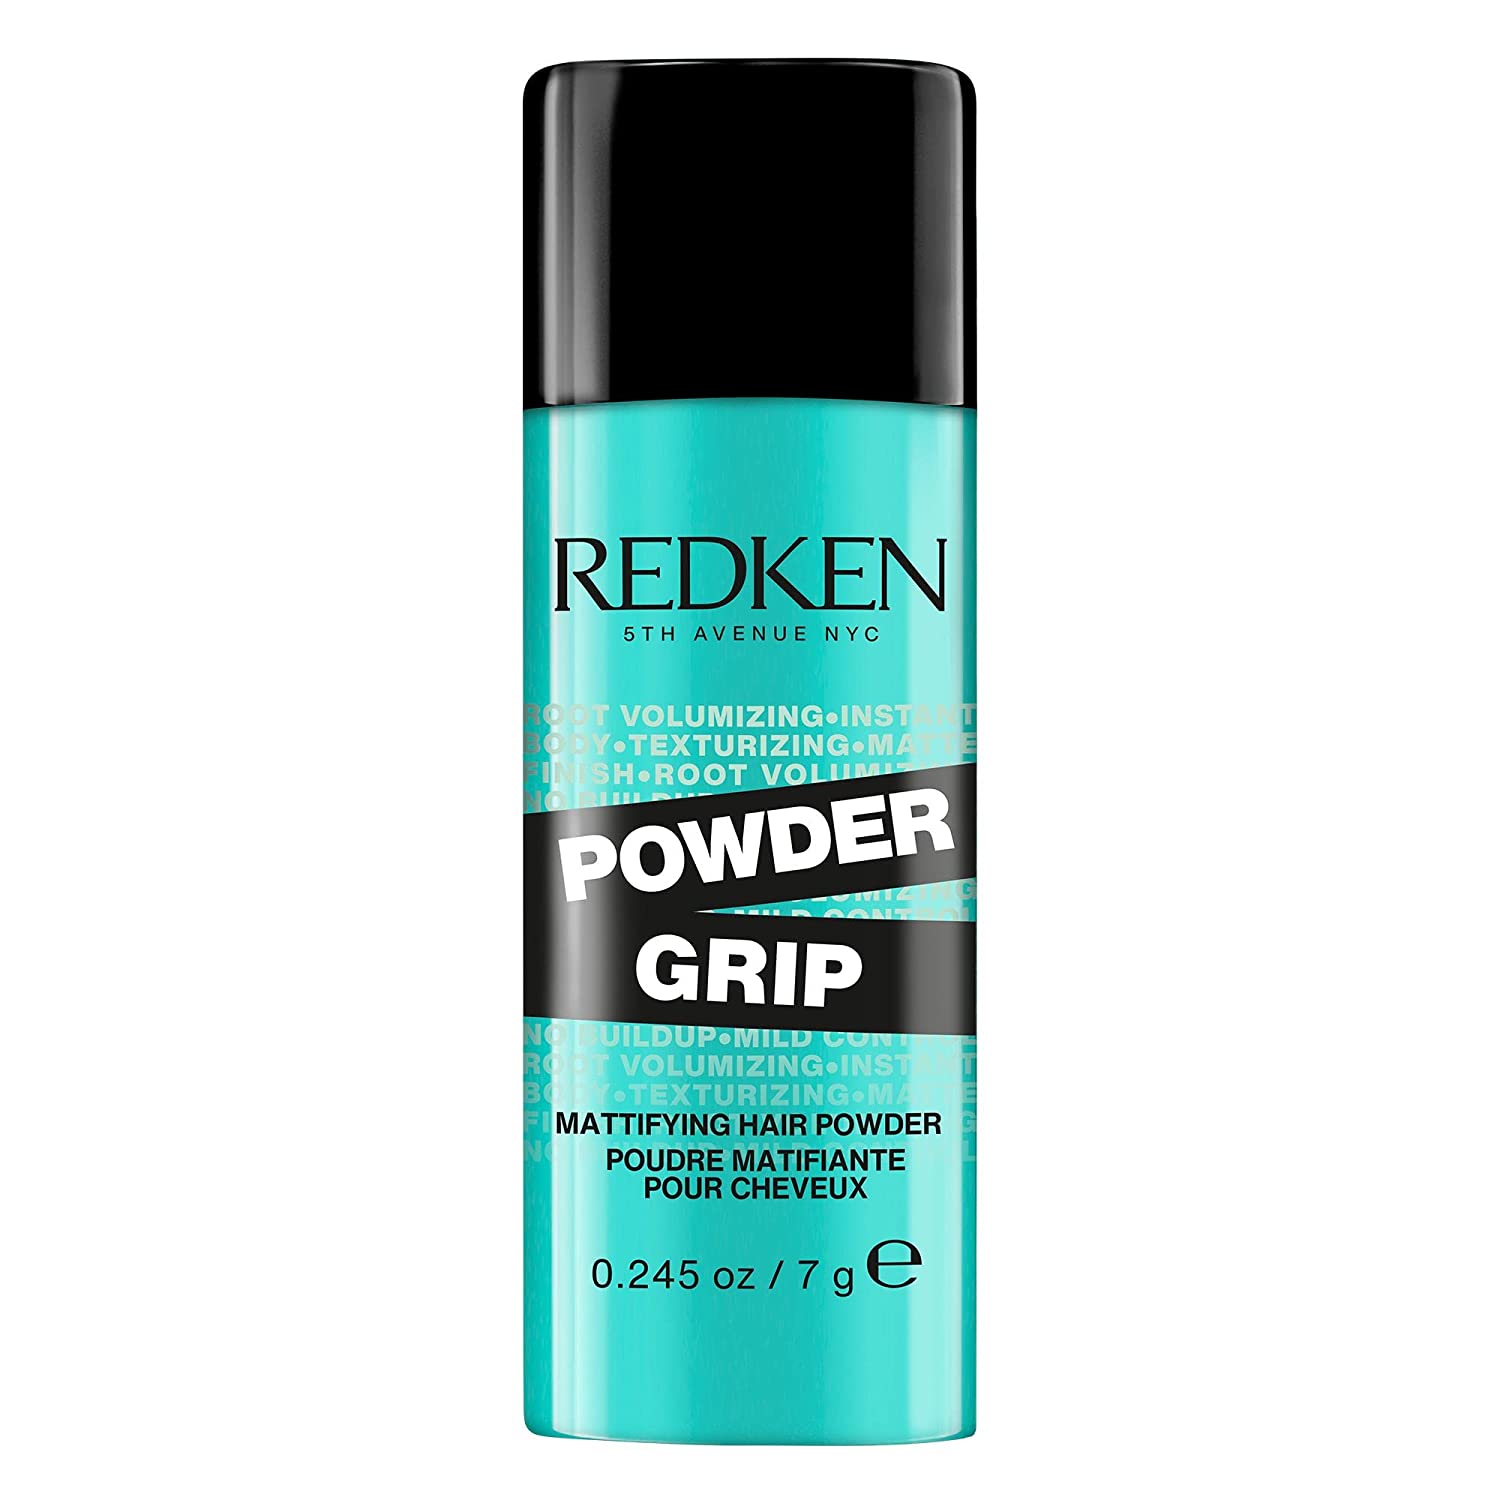 Redken Hair powder for all hair types, for more volume and more grip, absorbs fat deposits, full looking hair, powder grip, 1 x 7 g